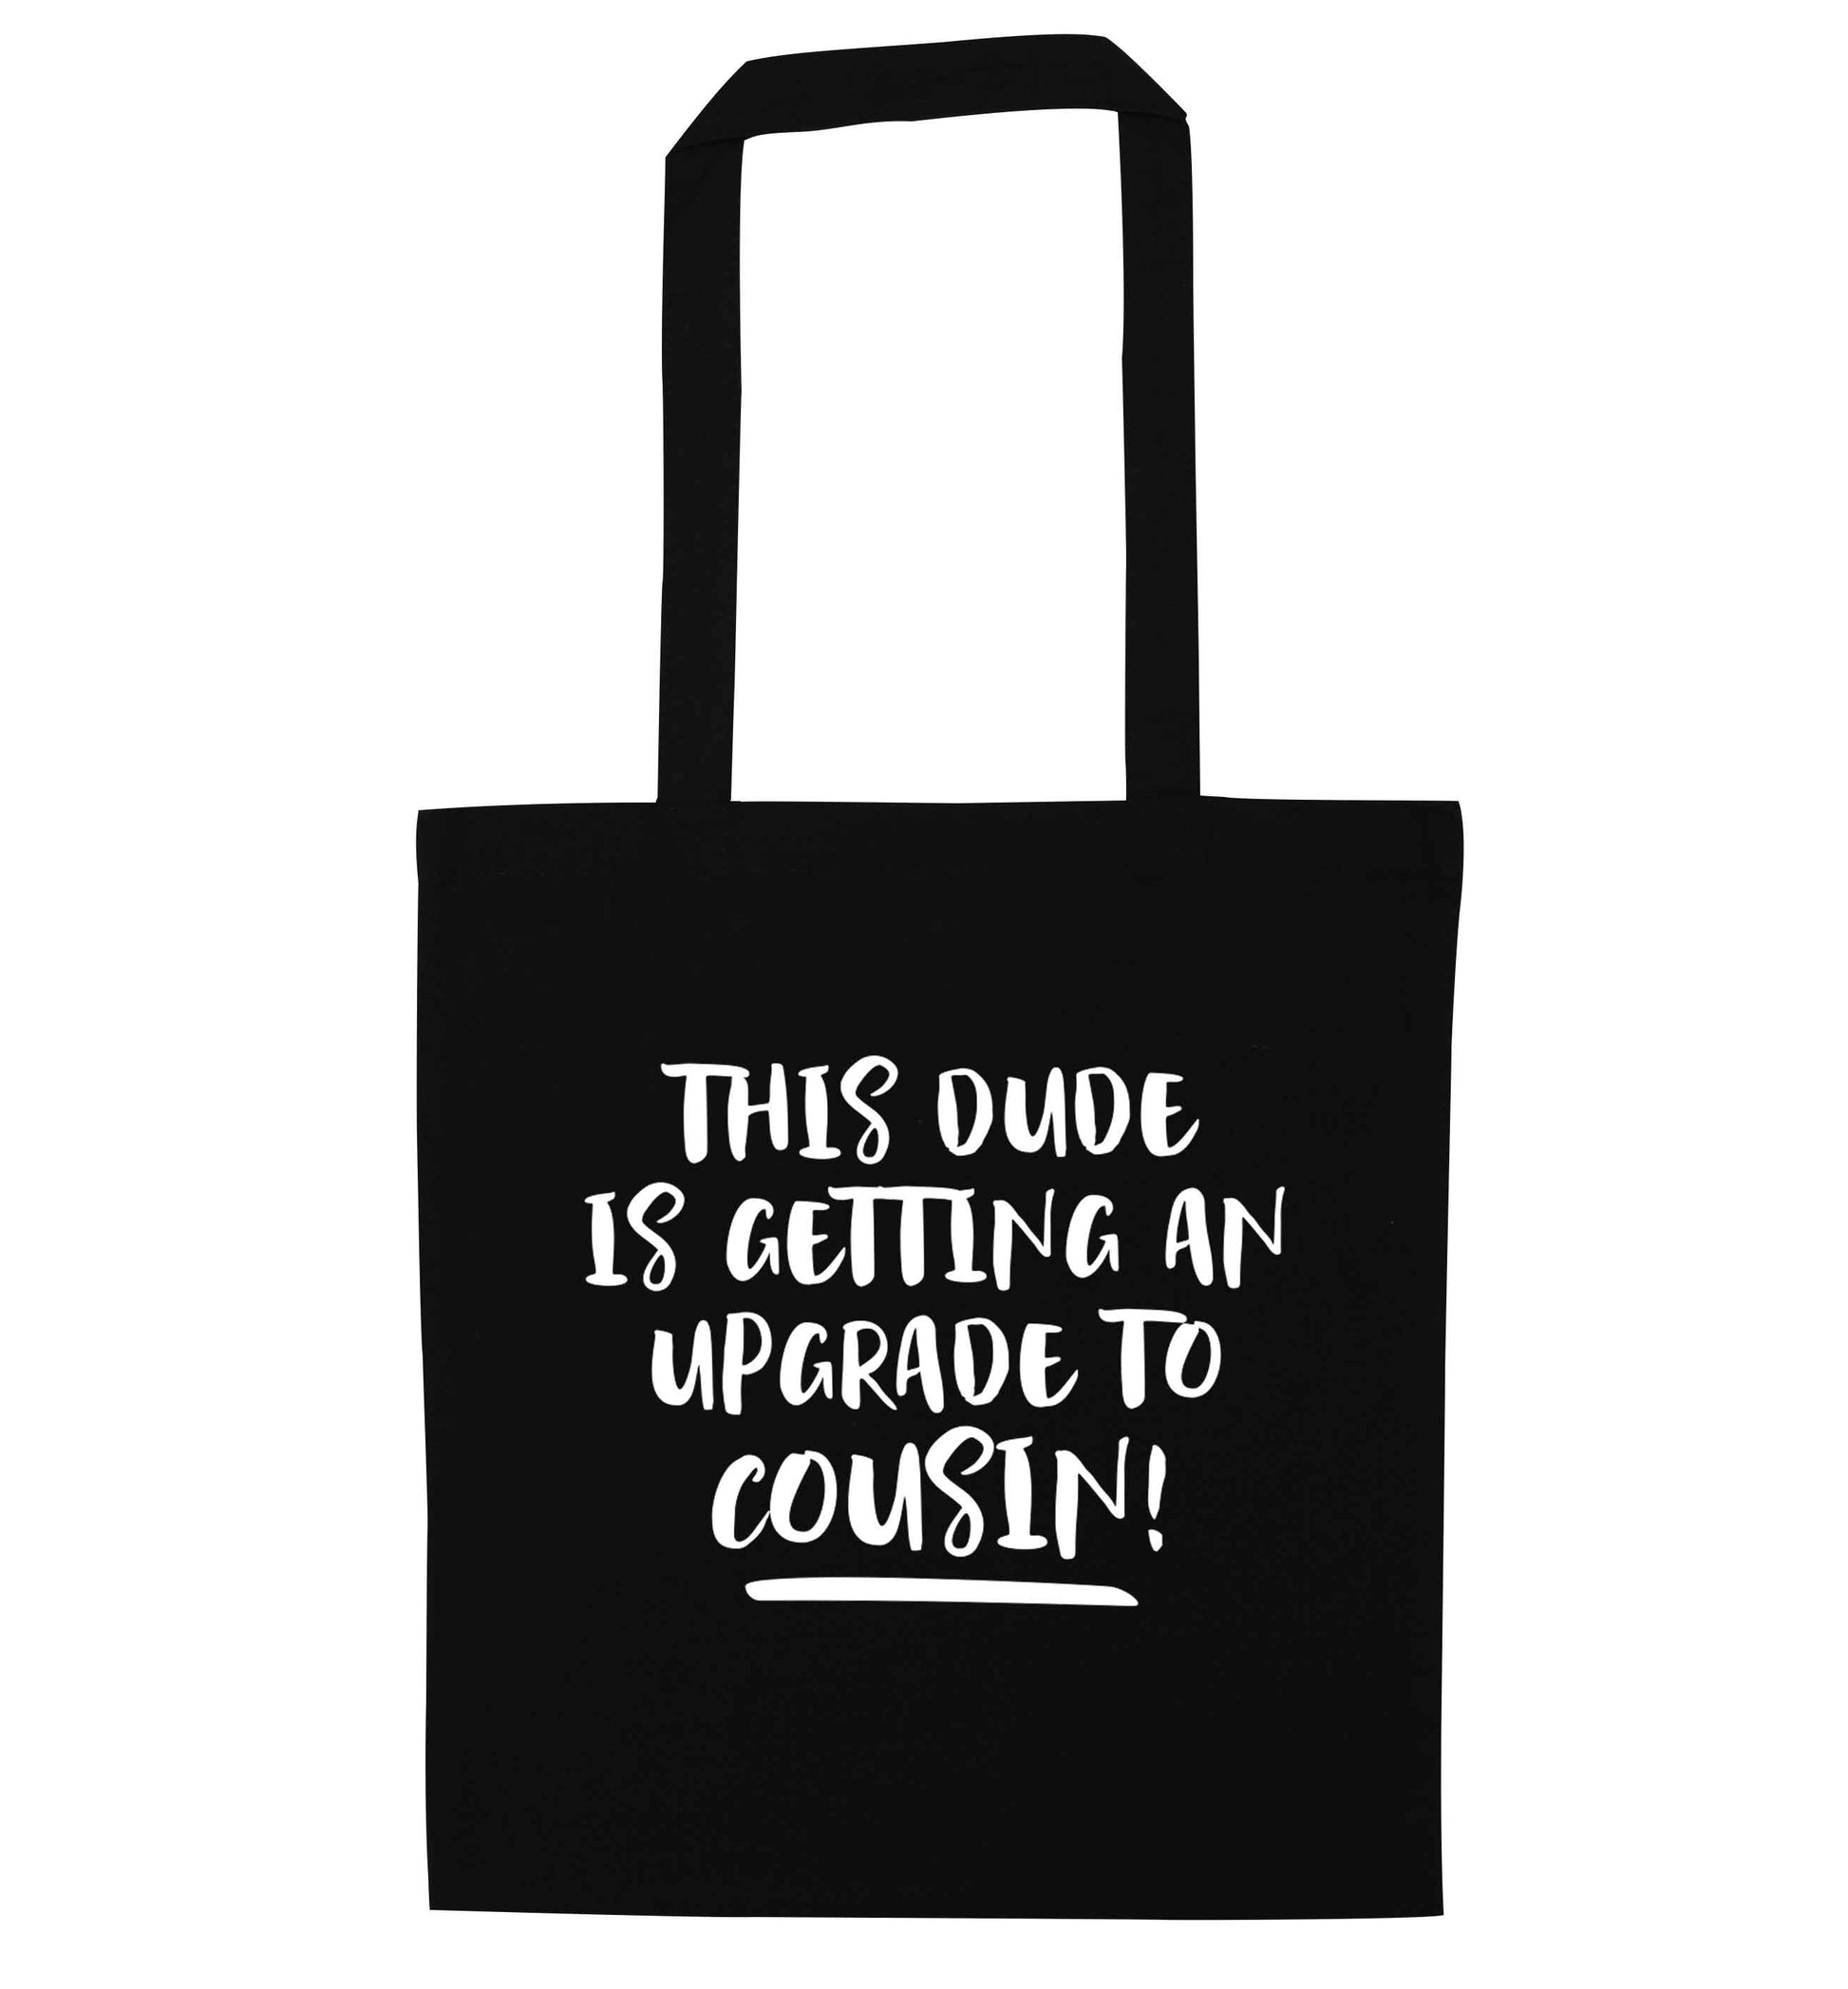 This dude is getting an upgrade to cousin! black tote bag